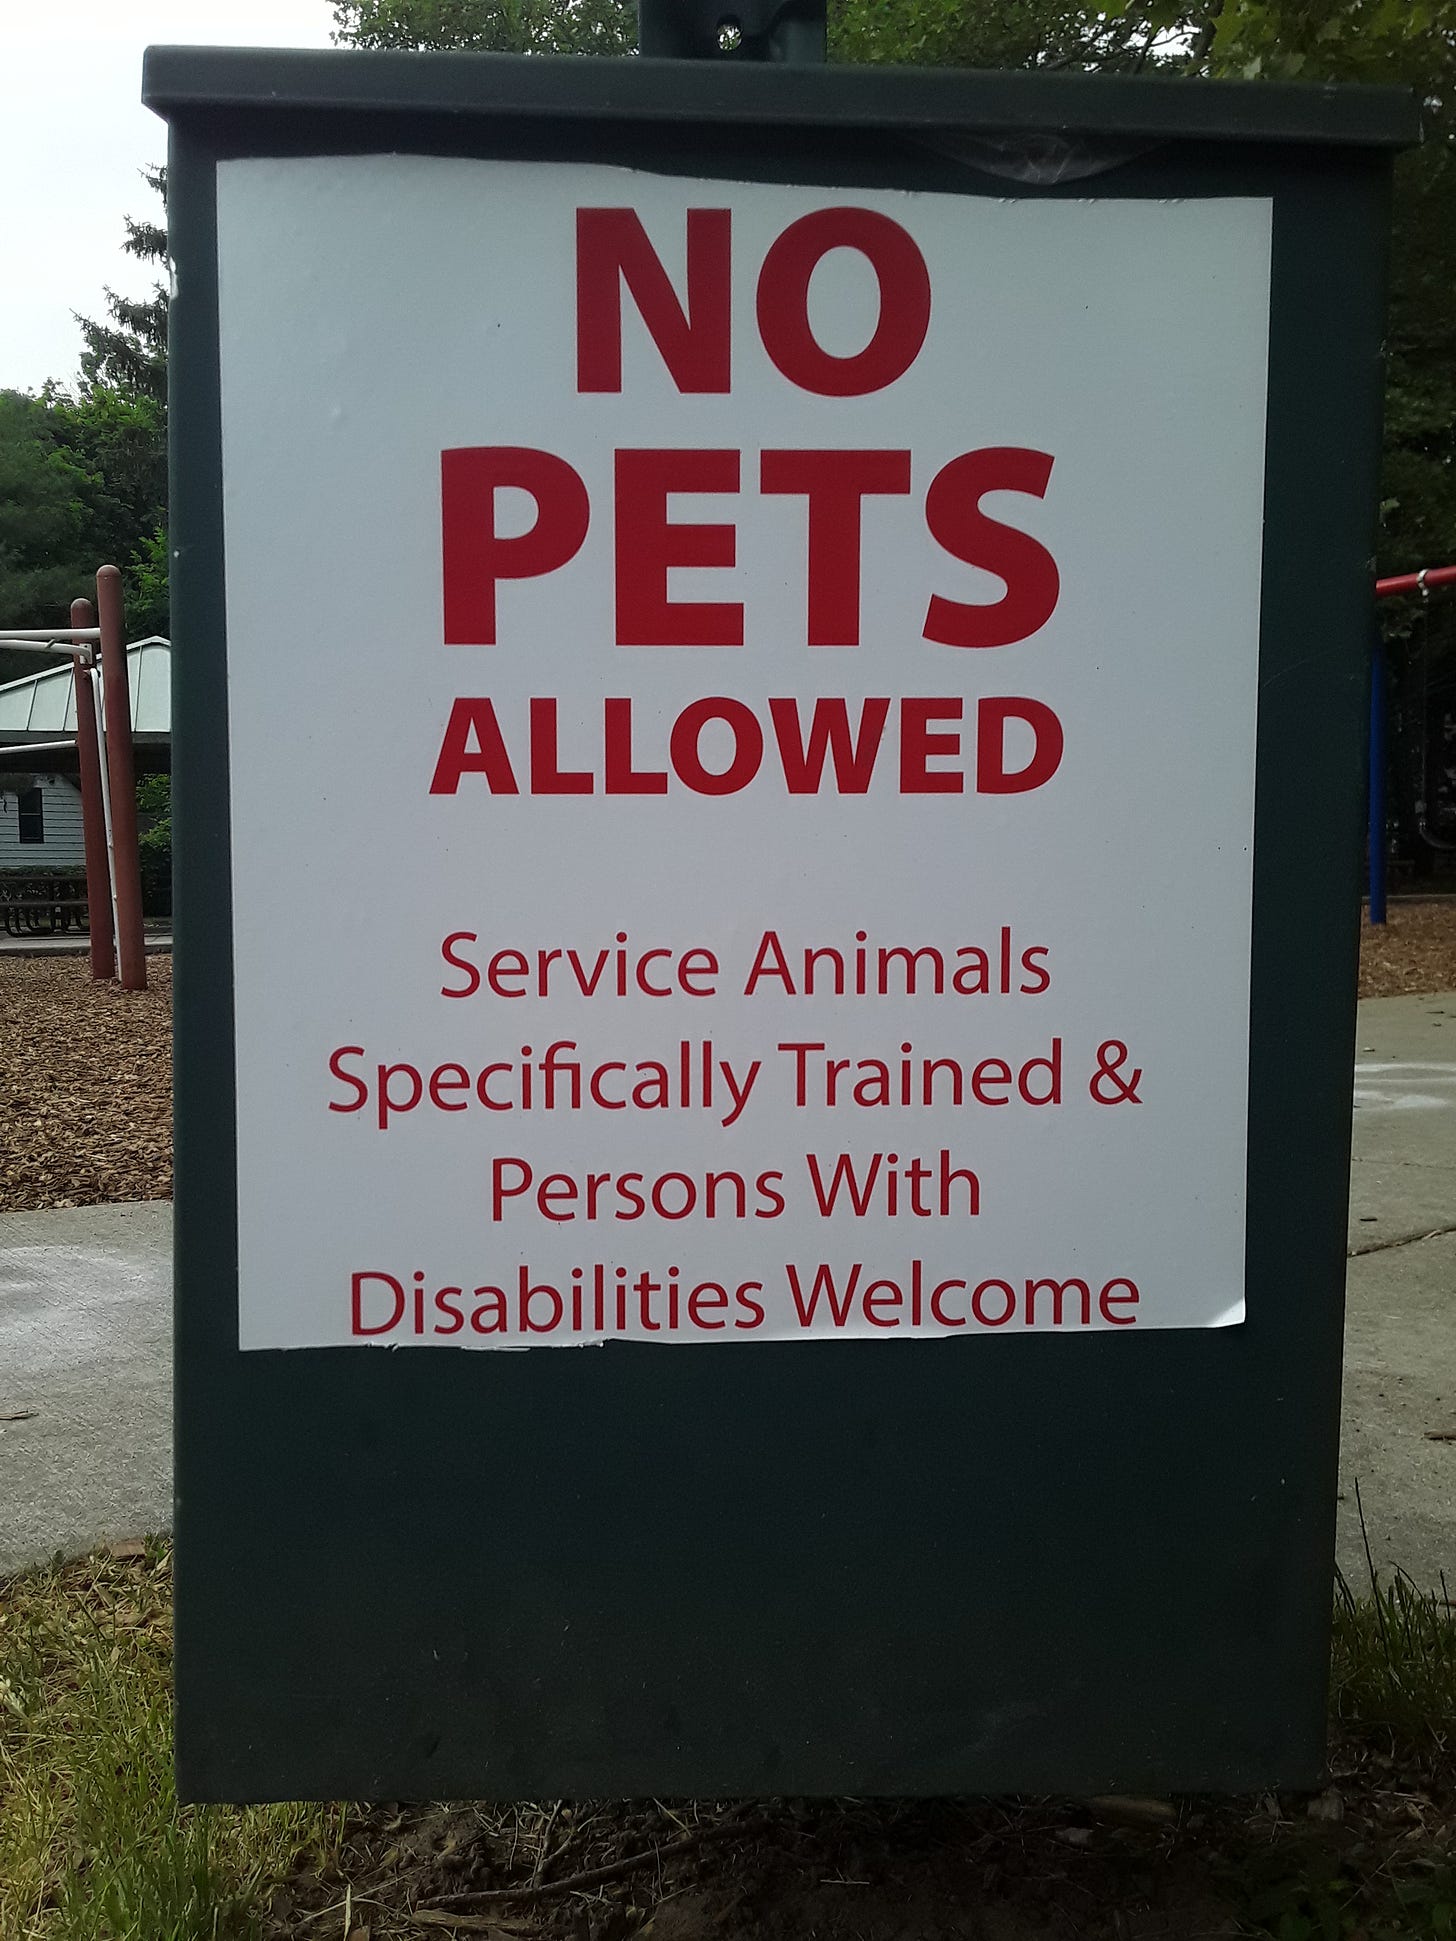 Photograph of the dog waste bin in Davis Street Park, showing a sign that reads "NO PETS ALLOWED.  Service Animals Specifically Trained & Persons With Disabilities Welcome".